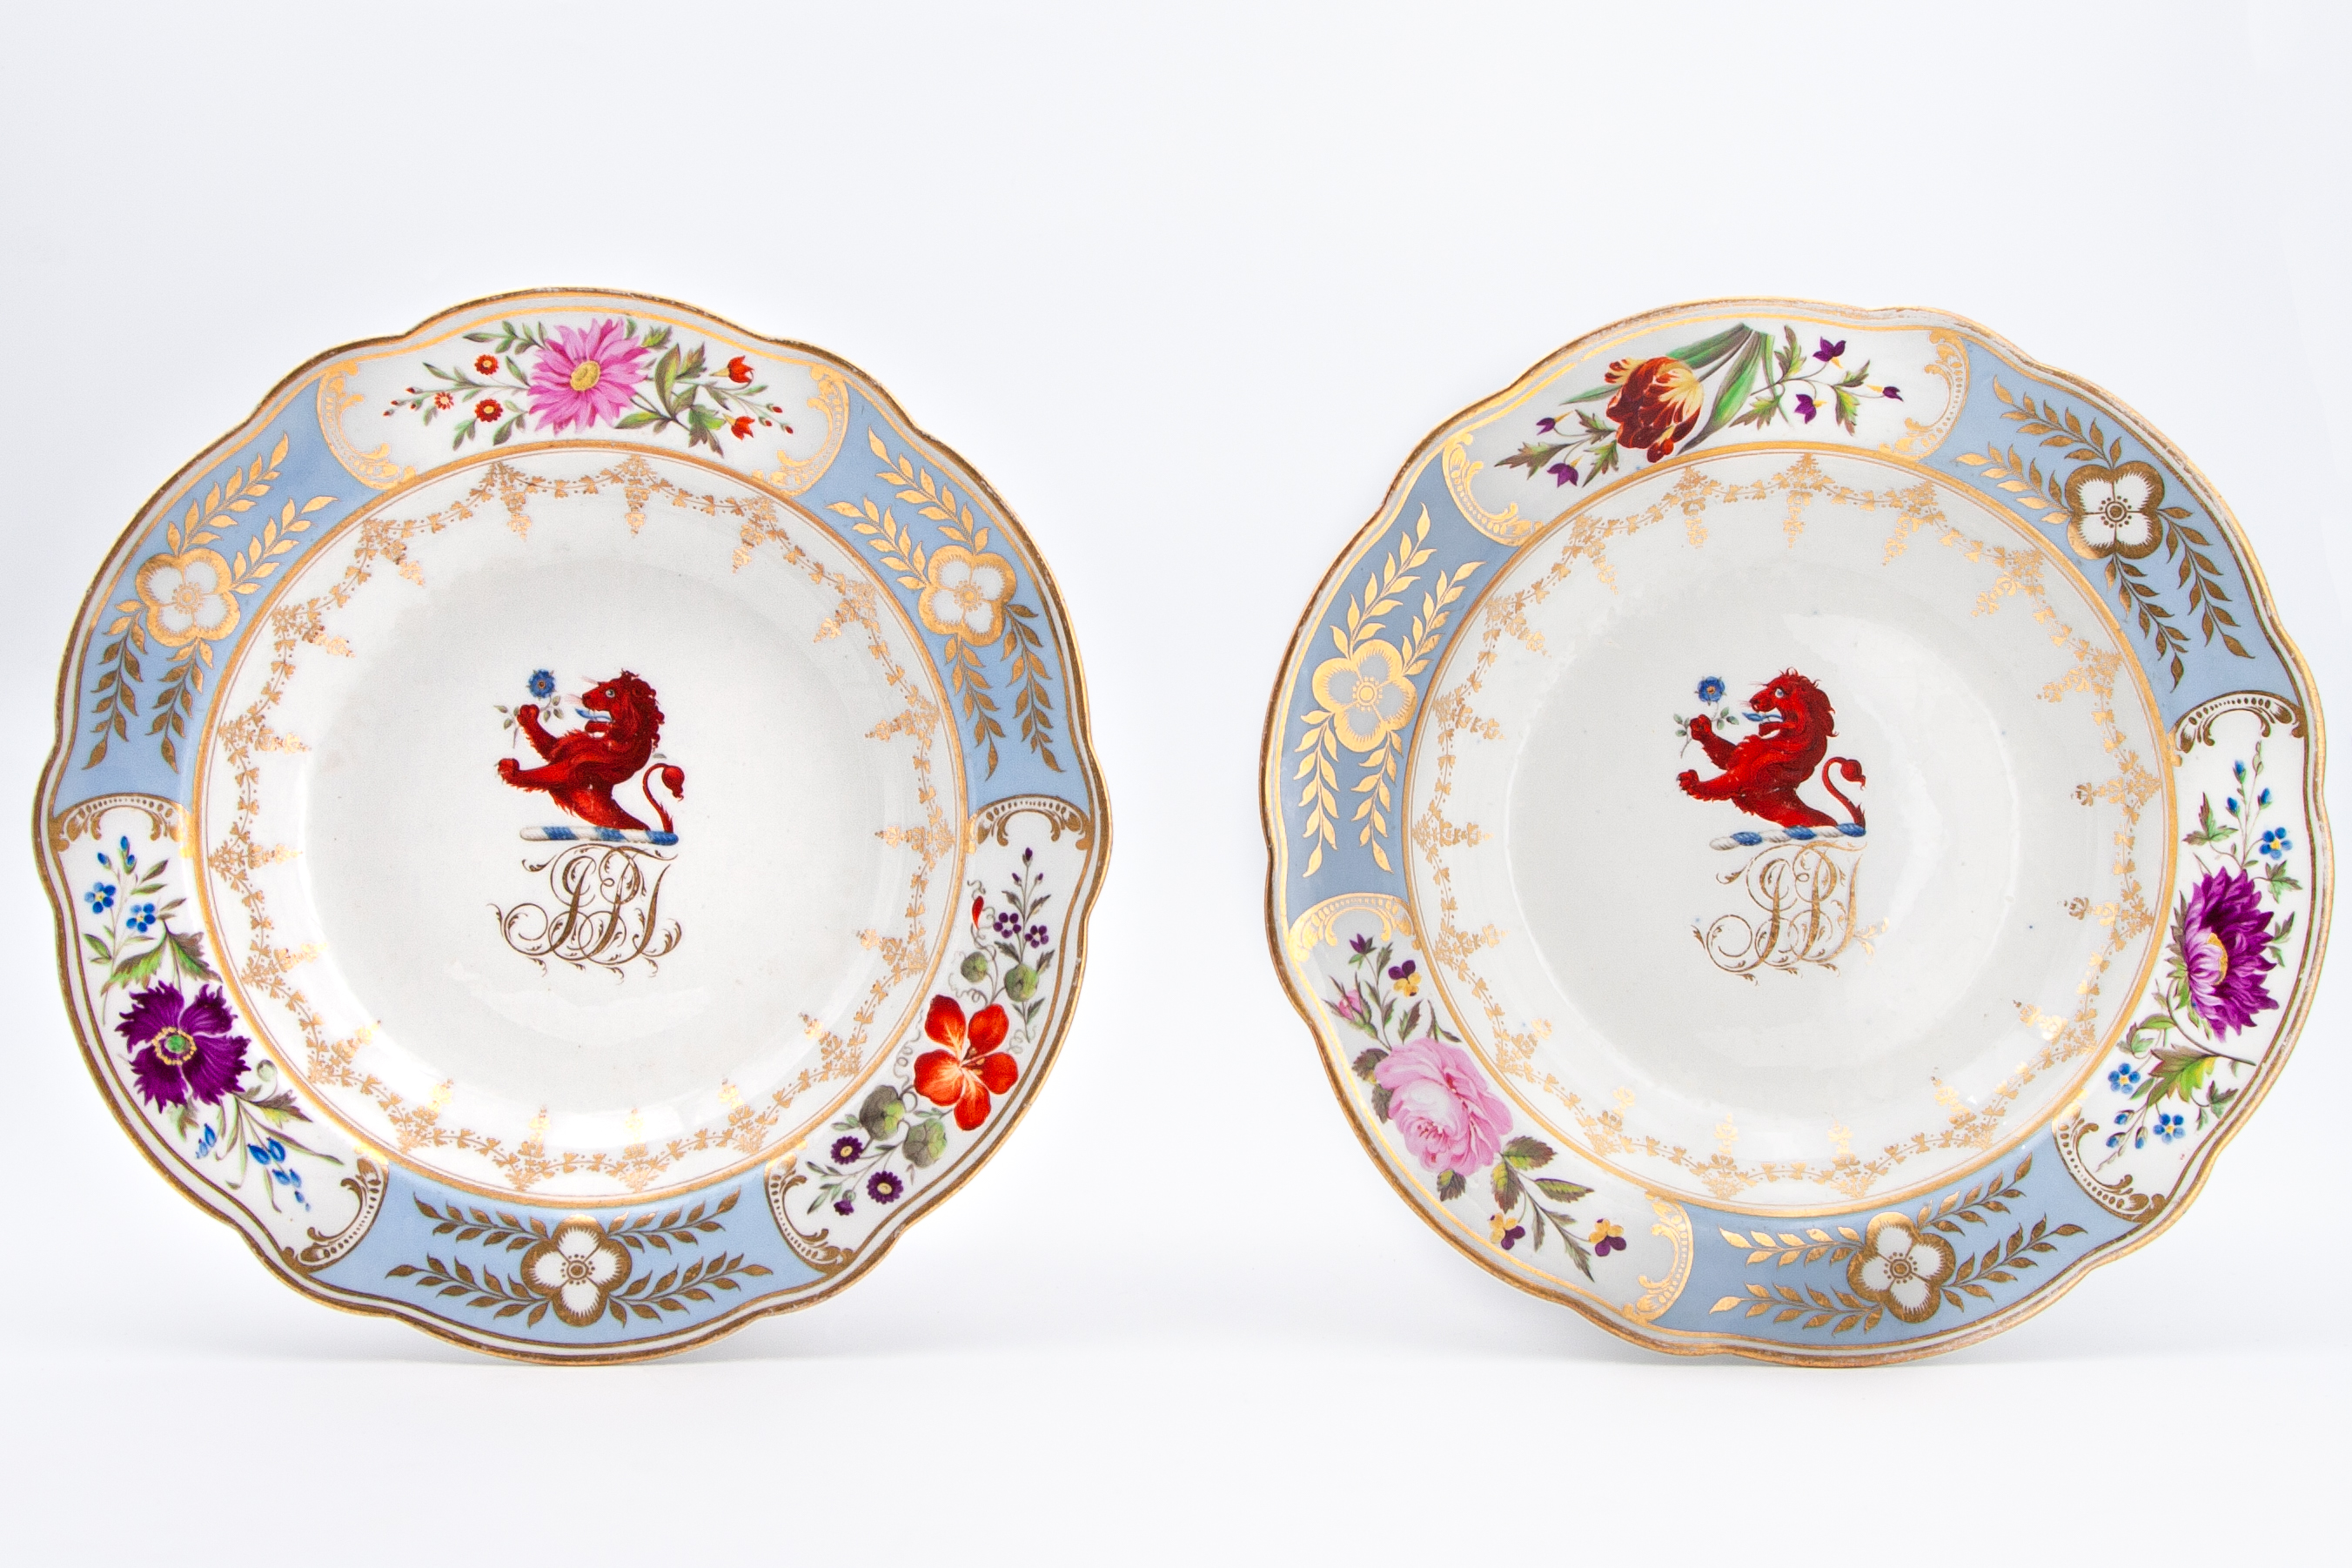 Chamberlains Worcester Porcelain Dishes